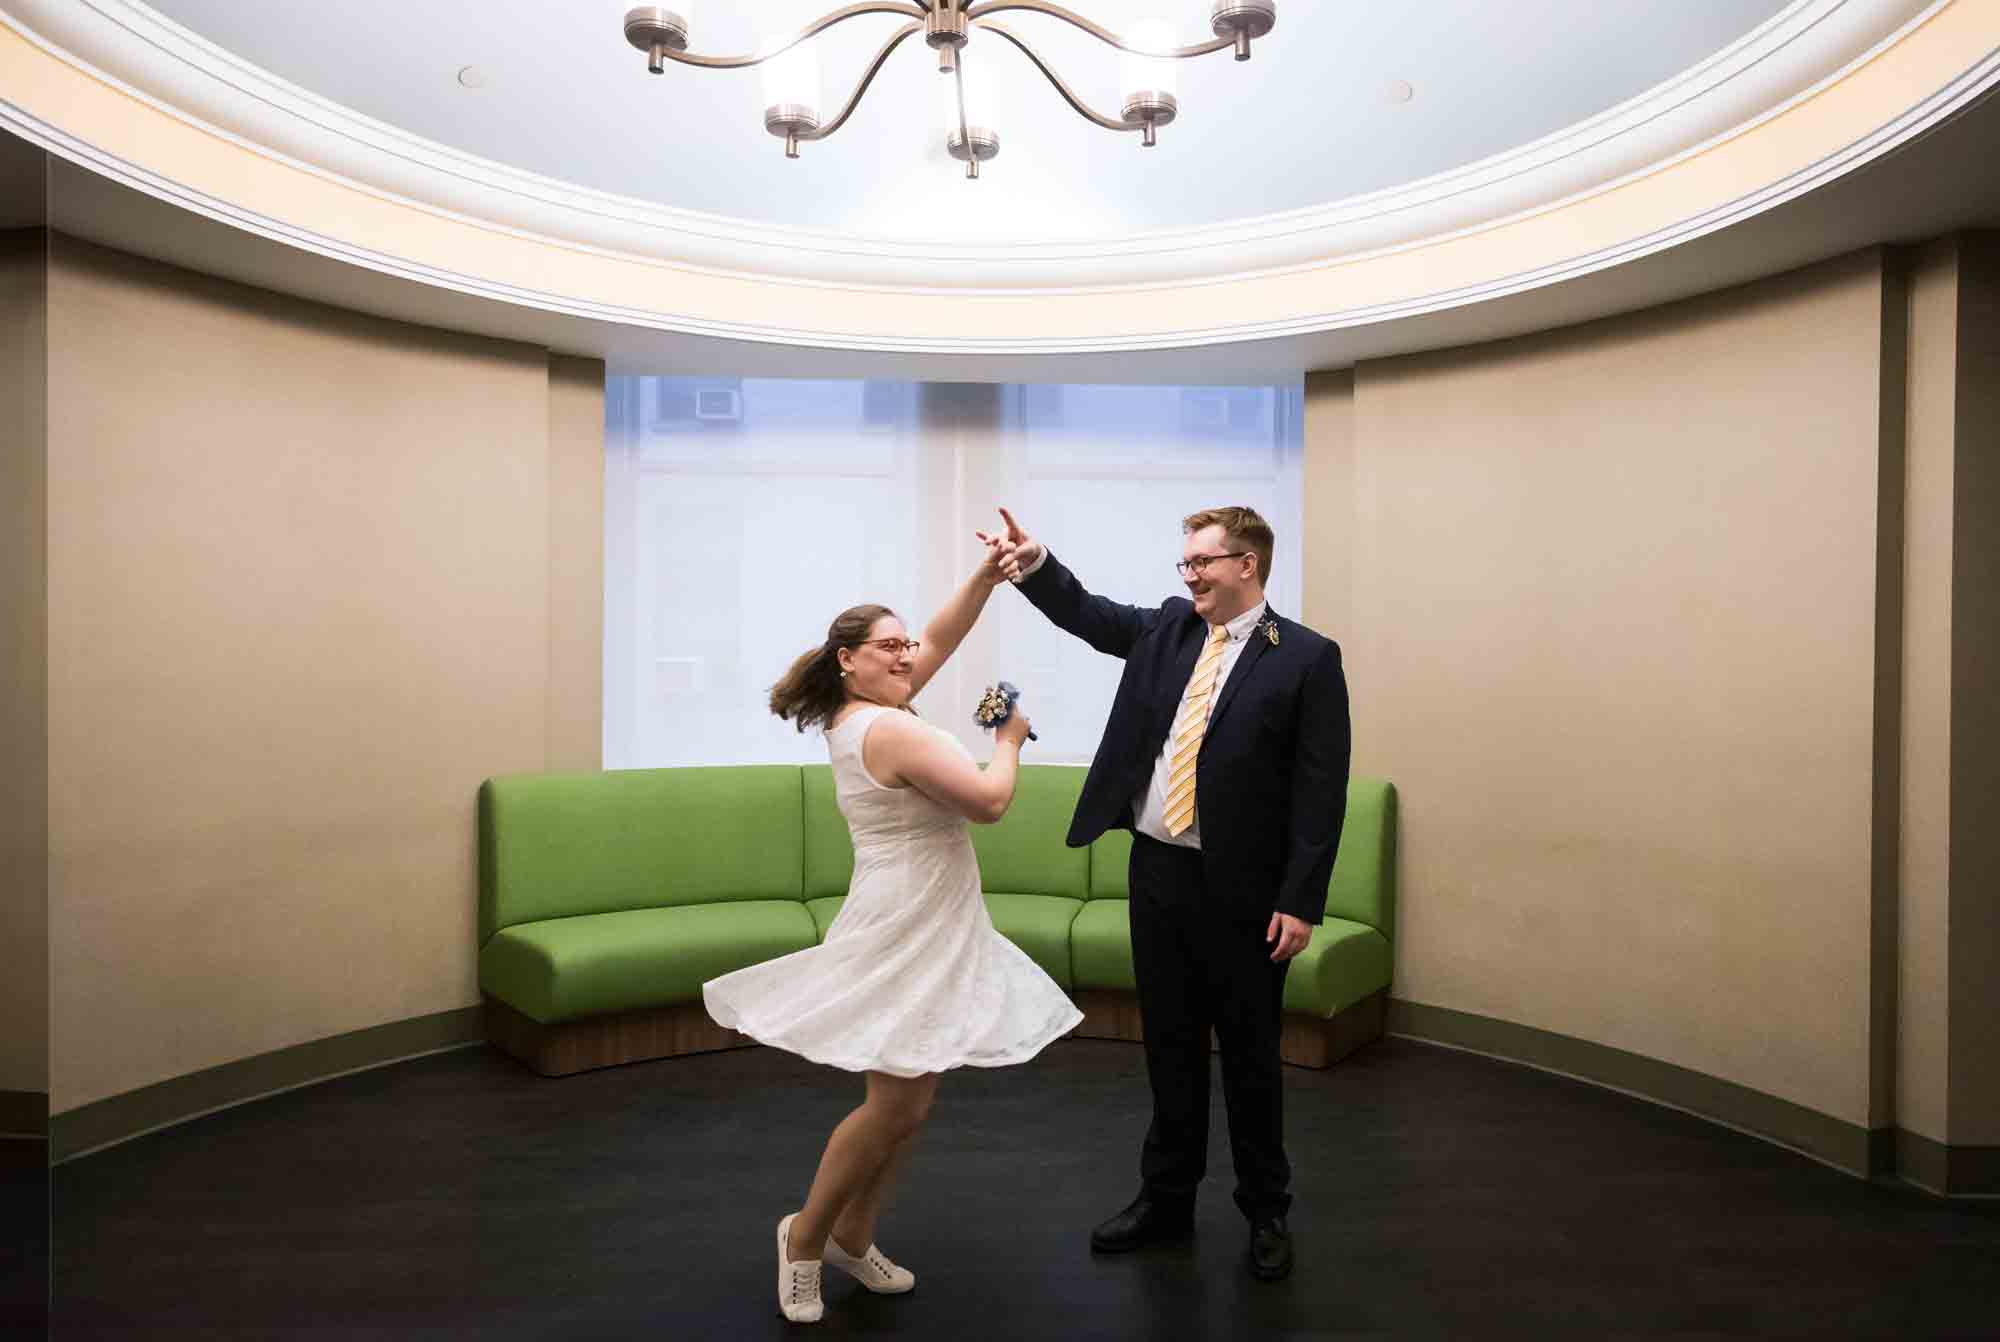 Bride and groom dancing under chandelier in front of green couch for an article on how to get a marriage license in San Antonio